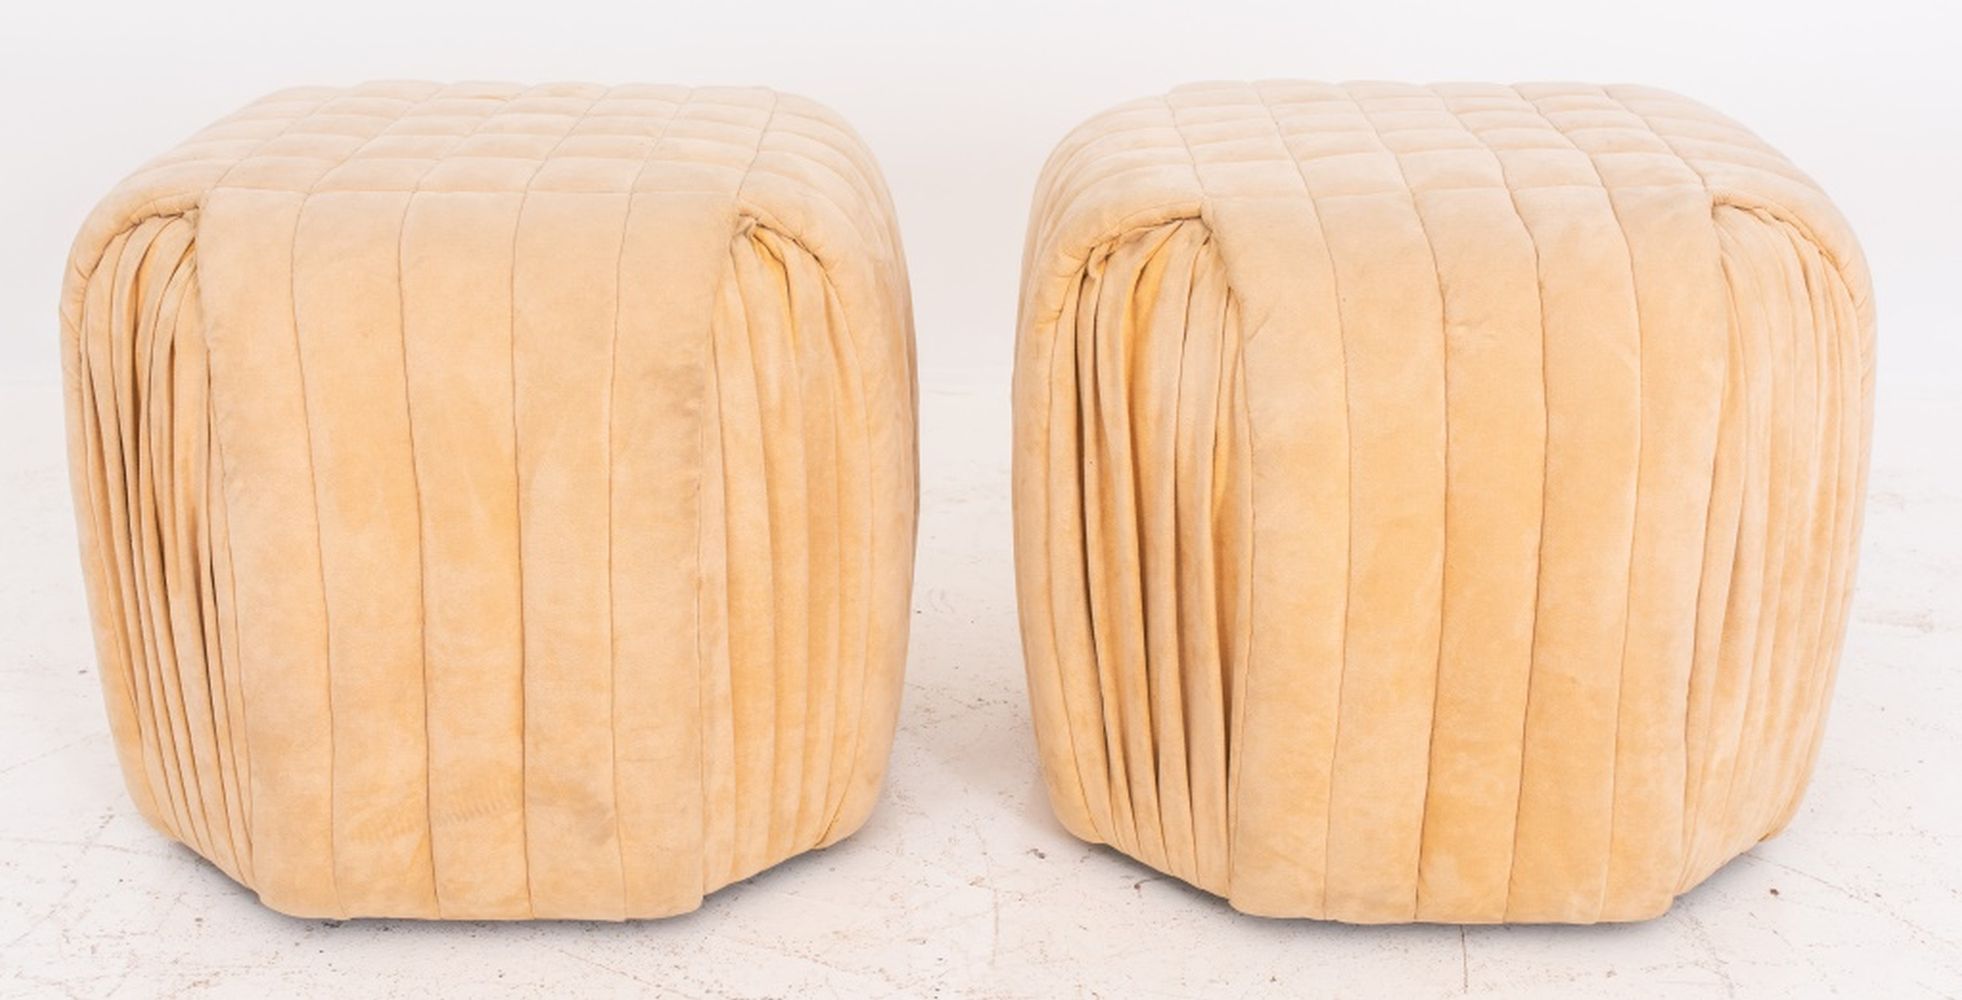 BEIGE UPHOLSTERED OTTOMANS PAIR 2bbe5d